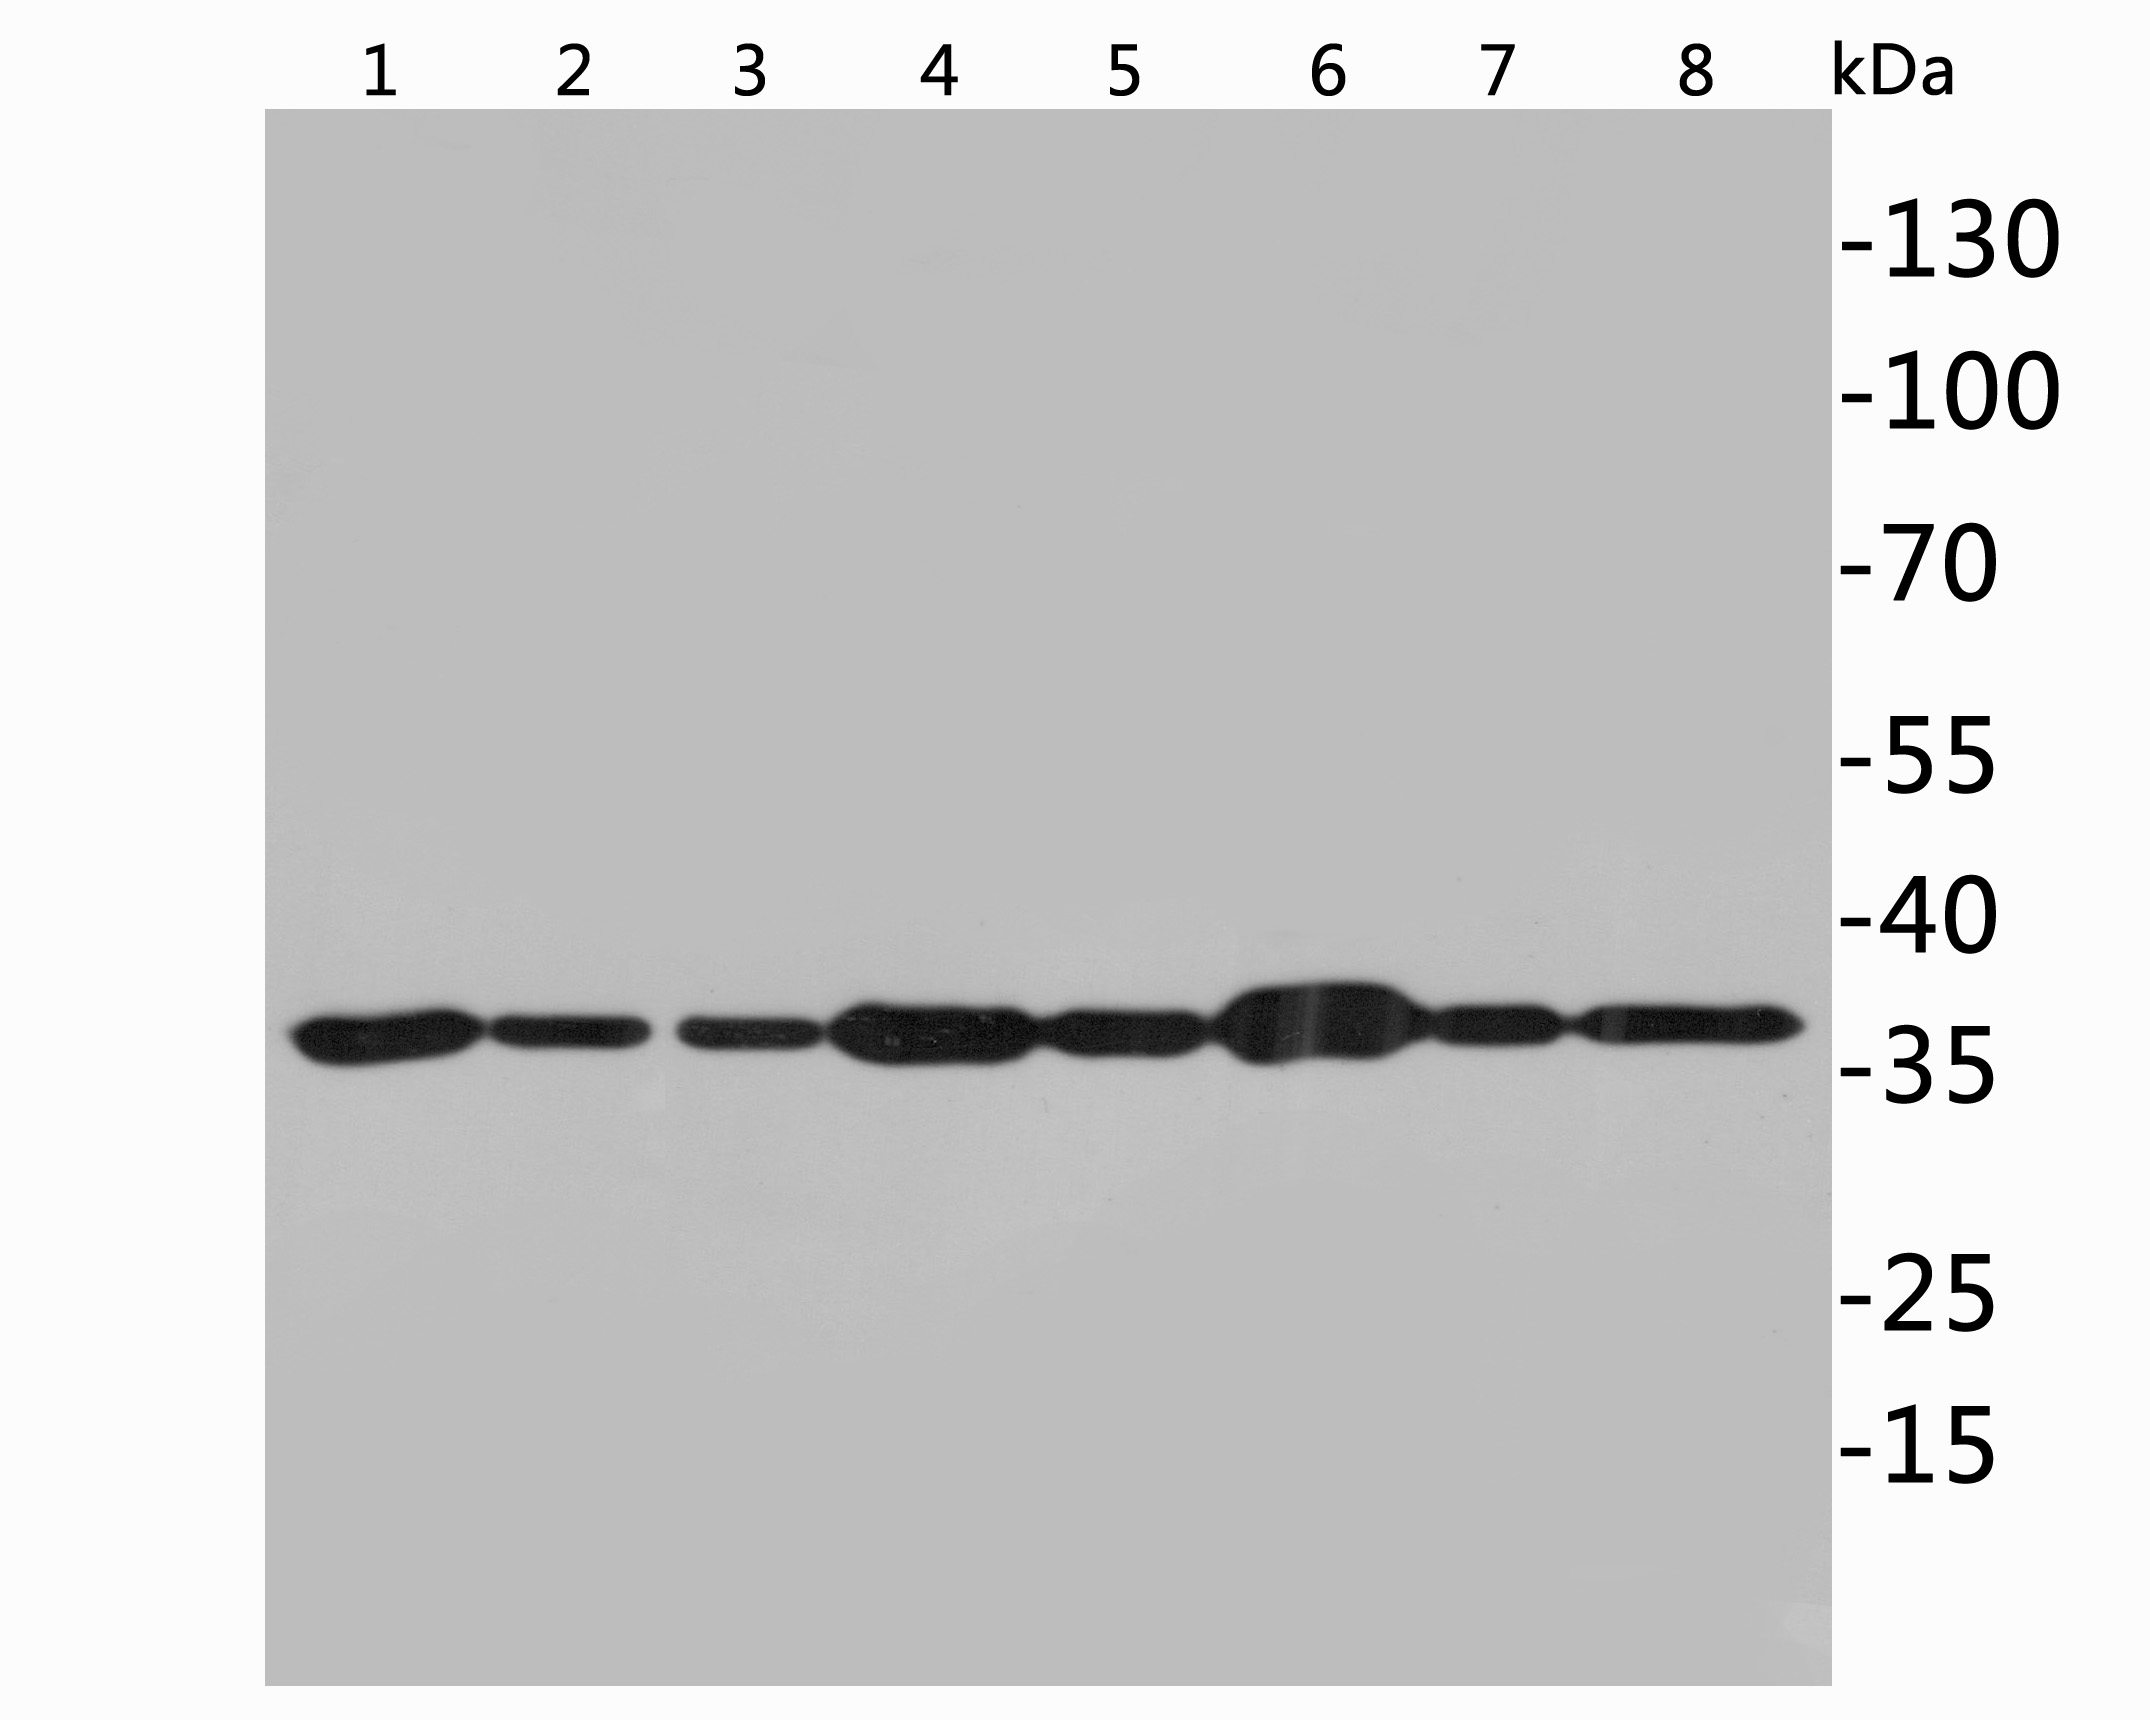 Western blot analysis of GAPDH on different lysates. Proteins were transferred to a PVDF membrane and blocked with 5% NFDM/TBST for 1 hour at room temperature. The primary antibody (ET1601-4, 1/10,000) was used in 5% NFDM/TBST at room temperature for 1 hour. Goat Anti-Rabbit IgG - HRP Secondary Antibody (HA1001) at 1:200,000 dilution was used for 45 mins at room temperature.<br />
<br />
Positive control: <br />
Lane 1: Rat liver tissue lysate, 20 µg/Lane<br />
Lane 2: Rat lung tissue lysate, 20 µg/Lane<br />
Lane 3: Rat lung tissue lysate, 20 µg/Lane<br />
Lane 4: Rat heart tissue lysate, 20 µg/Lane<br />
Lane 5: Rat cerebellum tissue lysate, 20 µg/Lane<br />
Lane 6: Rat skeletal muscle tissue lysate, 20 µg/Lane<br />
Lane 7: Rat spleen tissue lysate, 20 µg/Lane<br />
Lane 8: Rat small intestine tissue lysate, 20 µg/Lane